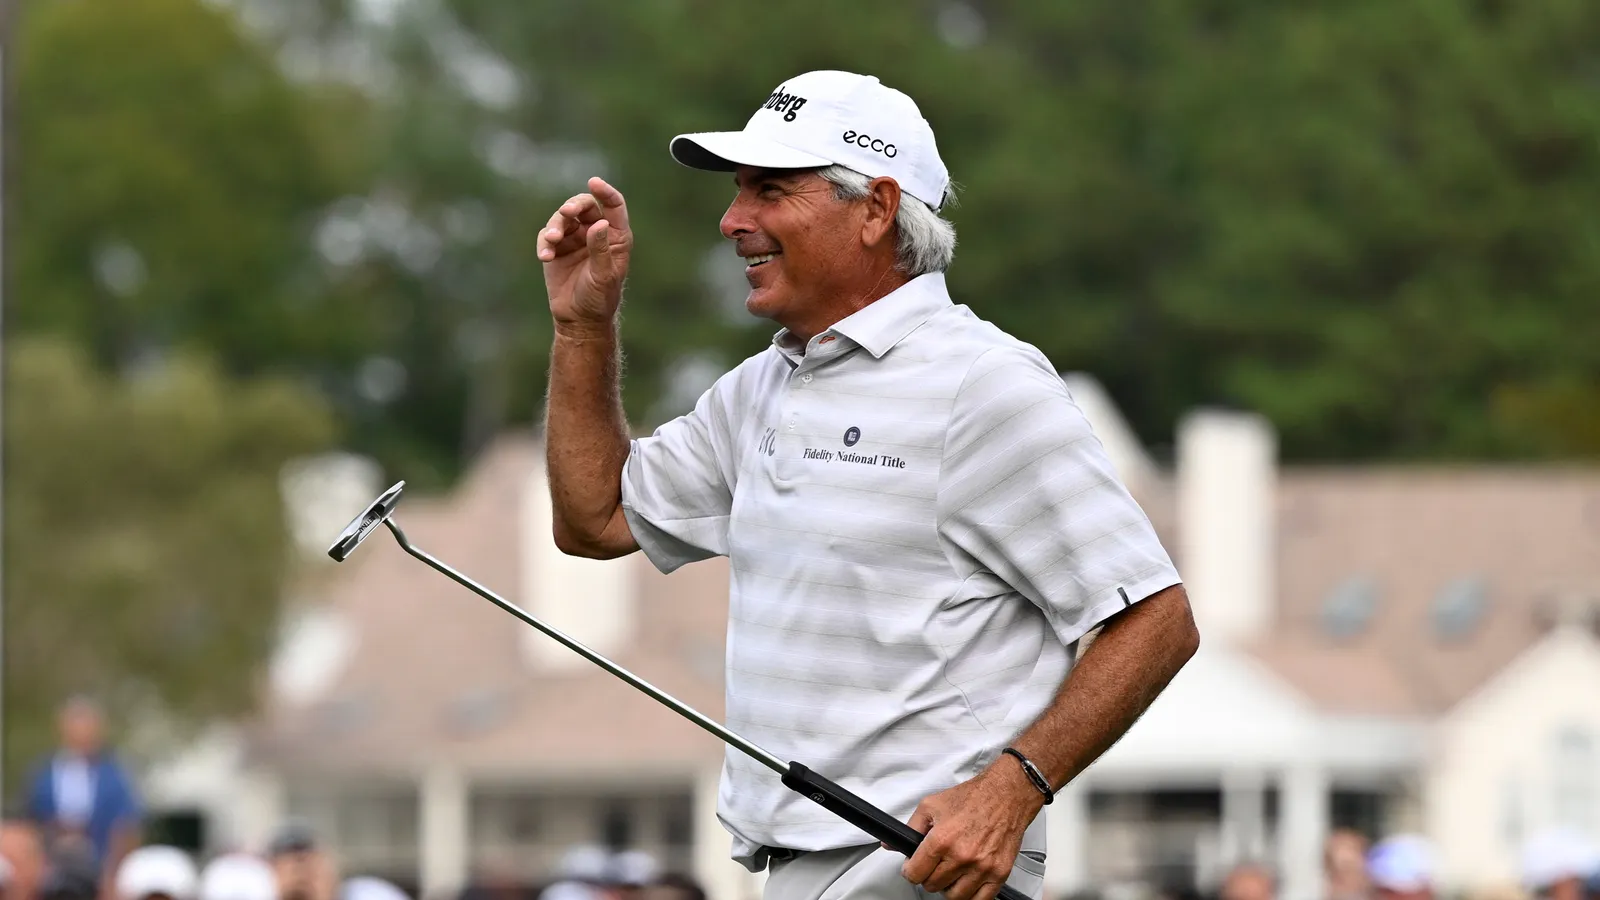 Garcia called a 'clown' and Mickelson a 'nutbag' as Fred Couples slams LIV Golf